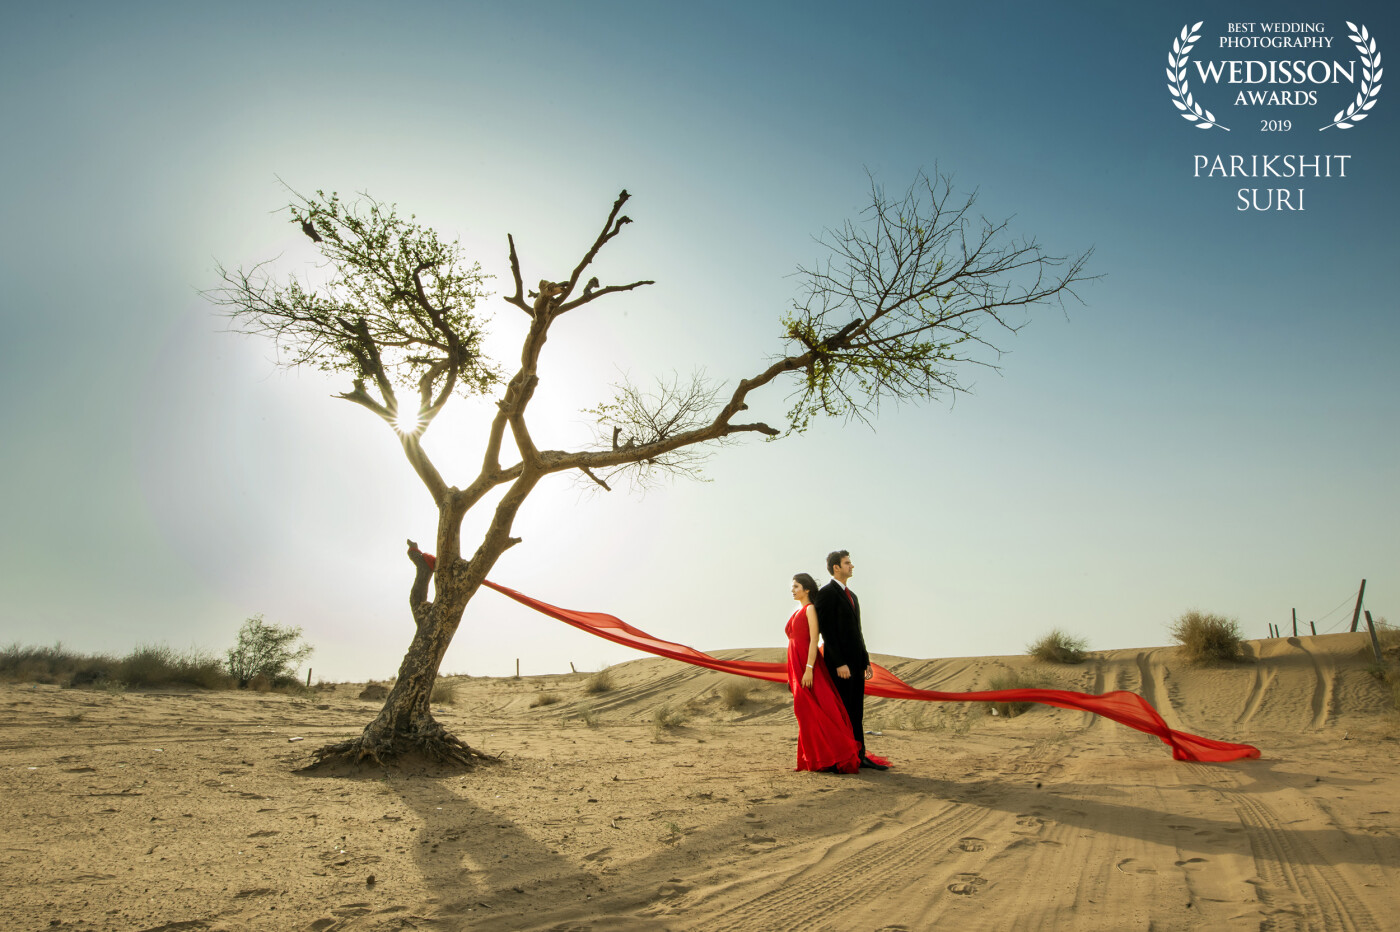 This image show the strength of a relations where with all the difficulties which is depicted by the colour red and the calm which is depicted by the pastel colour of the sand and the strength of their love which is depicted by the standing strong dead tree in the desert. shot on my Nikon D 810..